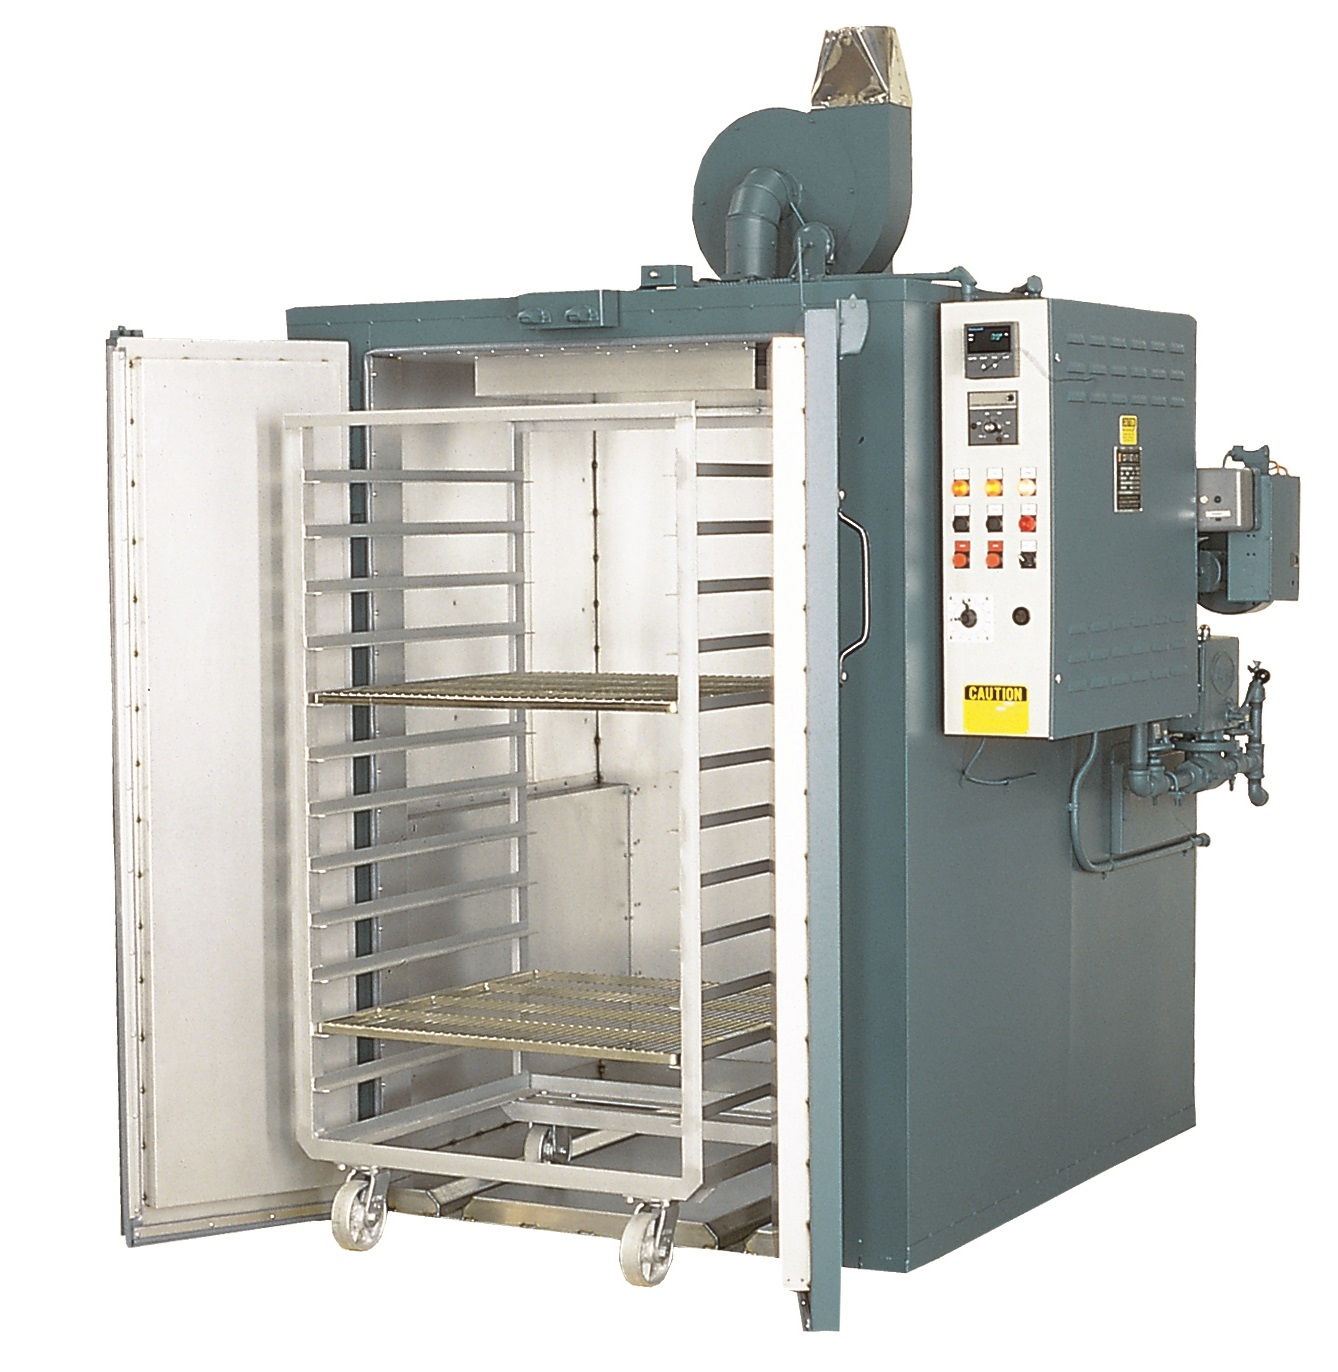 Buying Guide for Industrial Furnace/Industrial Oven